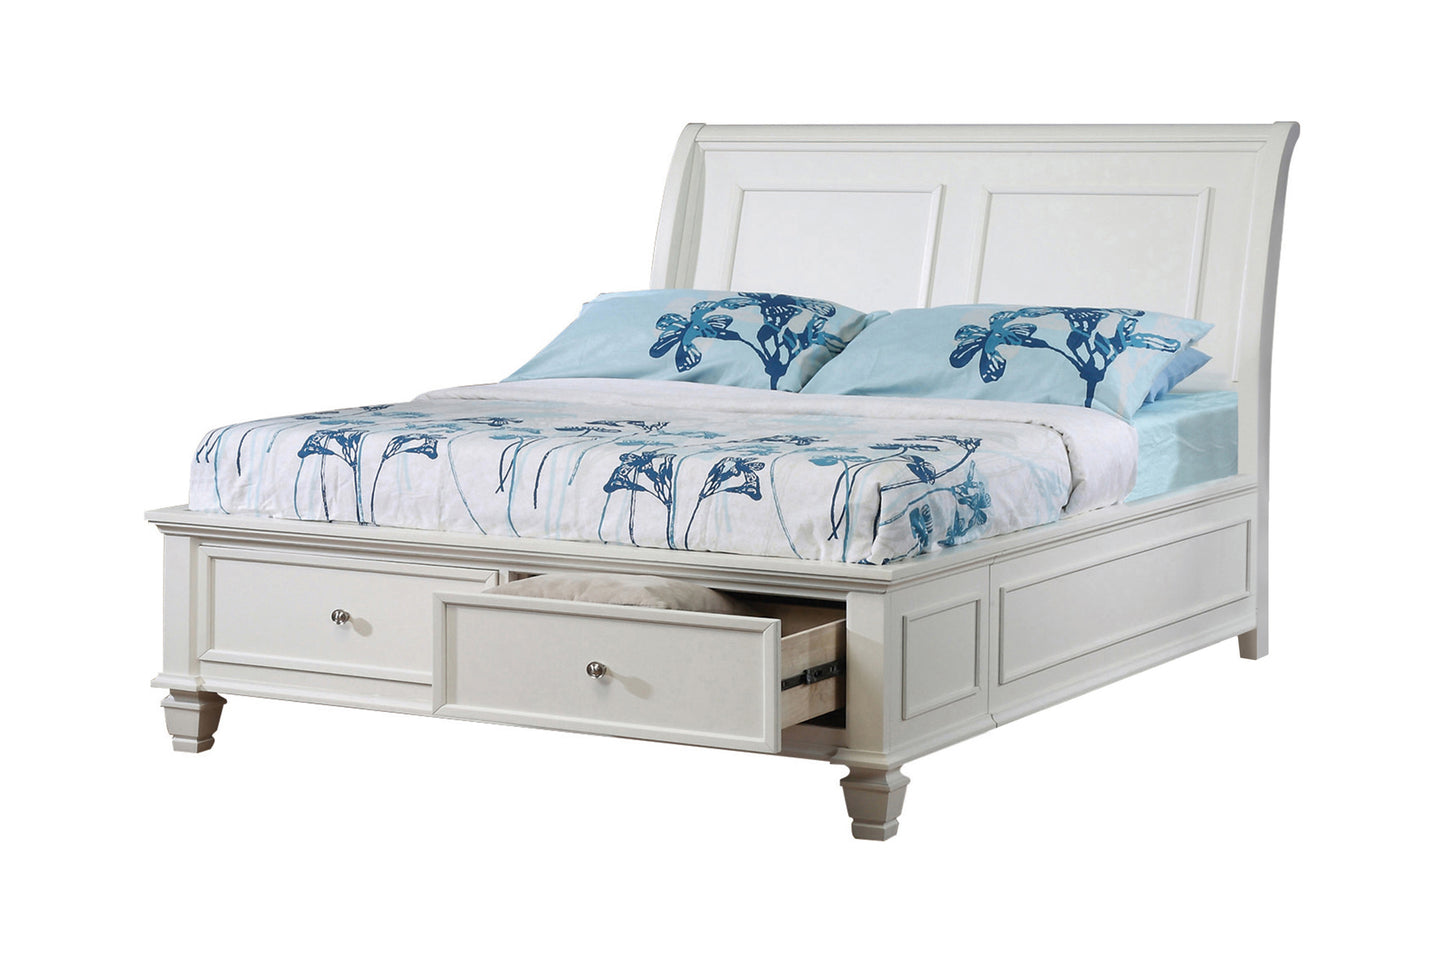 Selena Full Sleigh Bed With Footboard Storage Buttermilk  - 400239